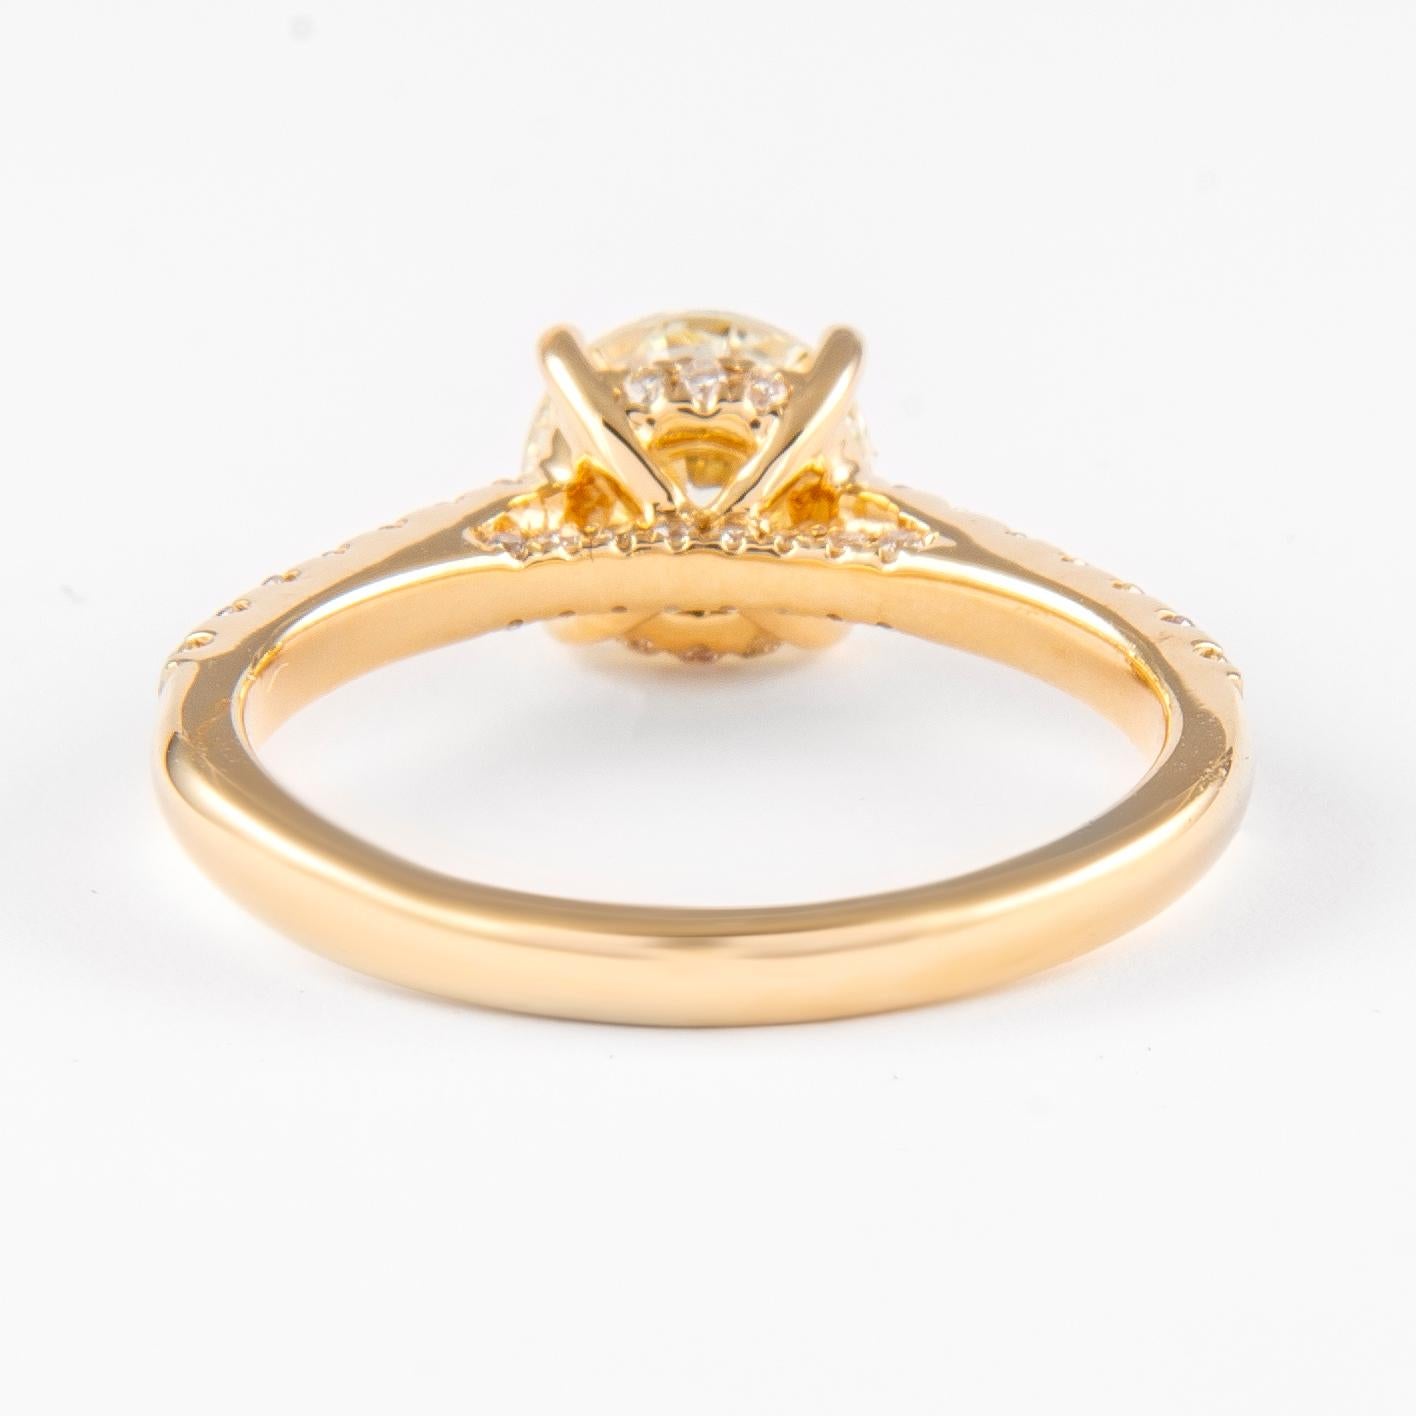 1.46 Carat Round Brilliant Diamond Ring 18 Karat Yellow Gold In New Condition For Sale In BEVERLY HILLS, CA